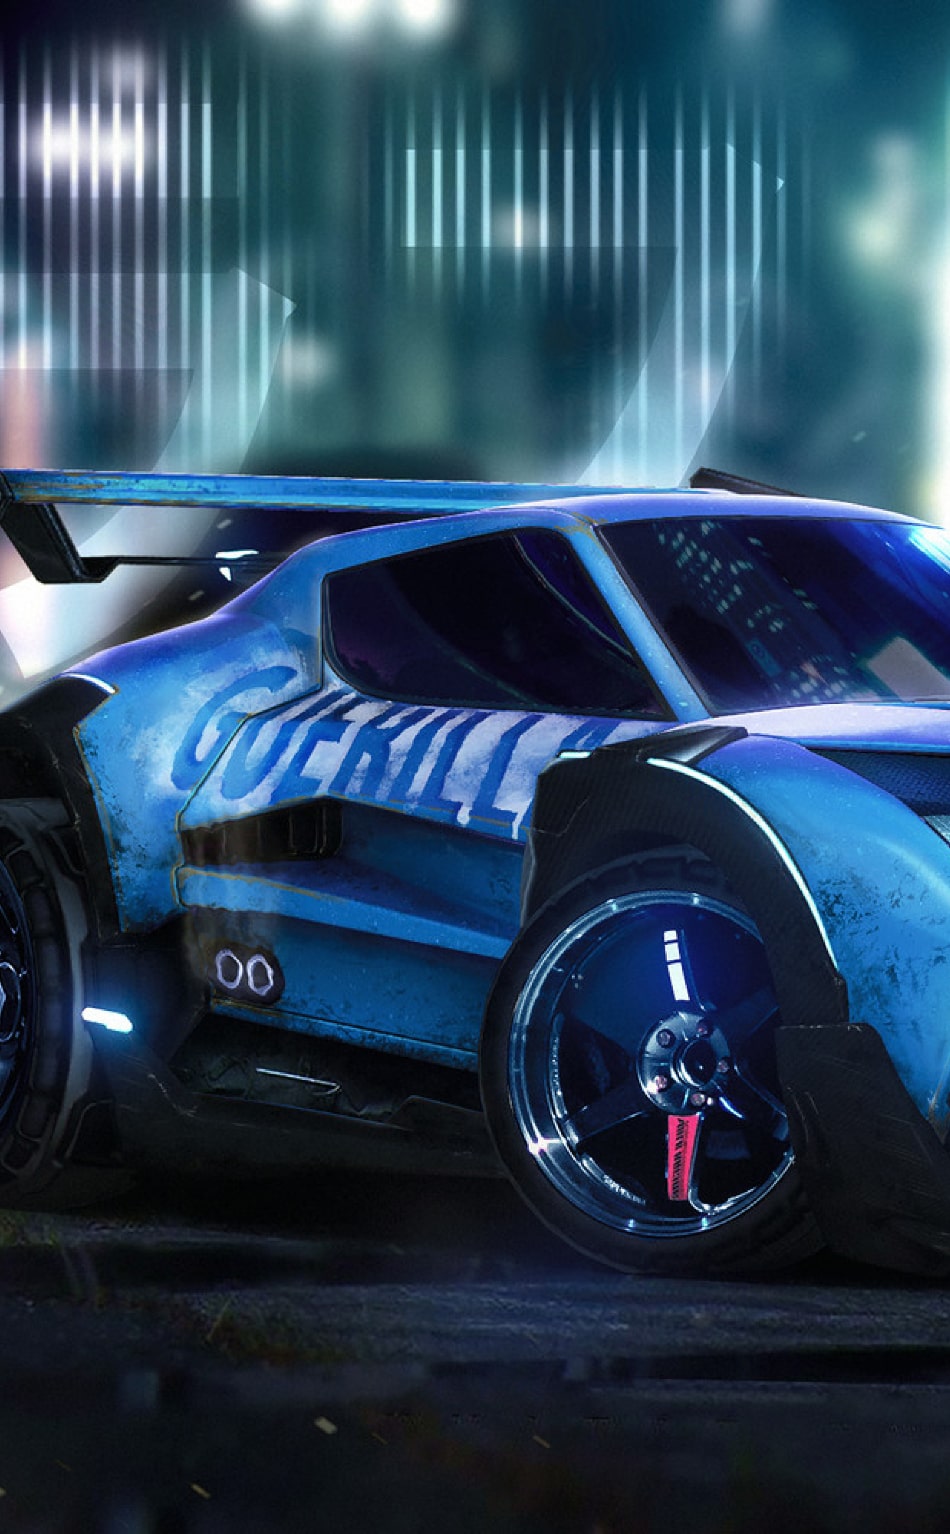 Rocket League iPhone Wallpapers - KoLPaPer - Awesome Free HD Wallpapers